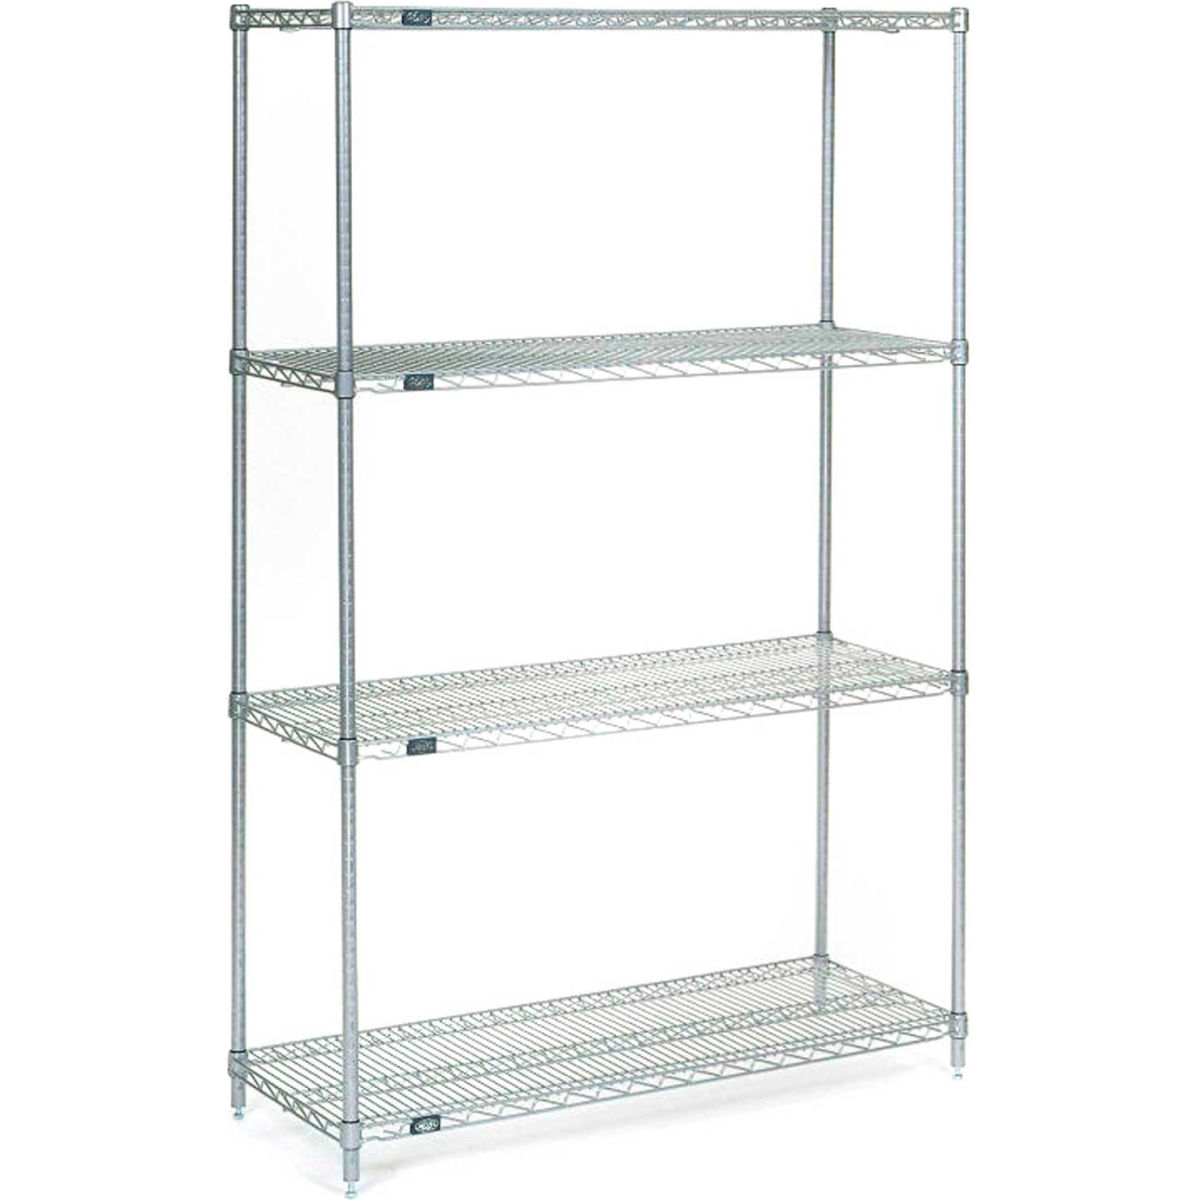 Picture of Global Industrial 14428S5 86 x 42 x 14 in. Nexel Stainless Steel Starter 5 Tier Wire Shelving